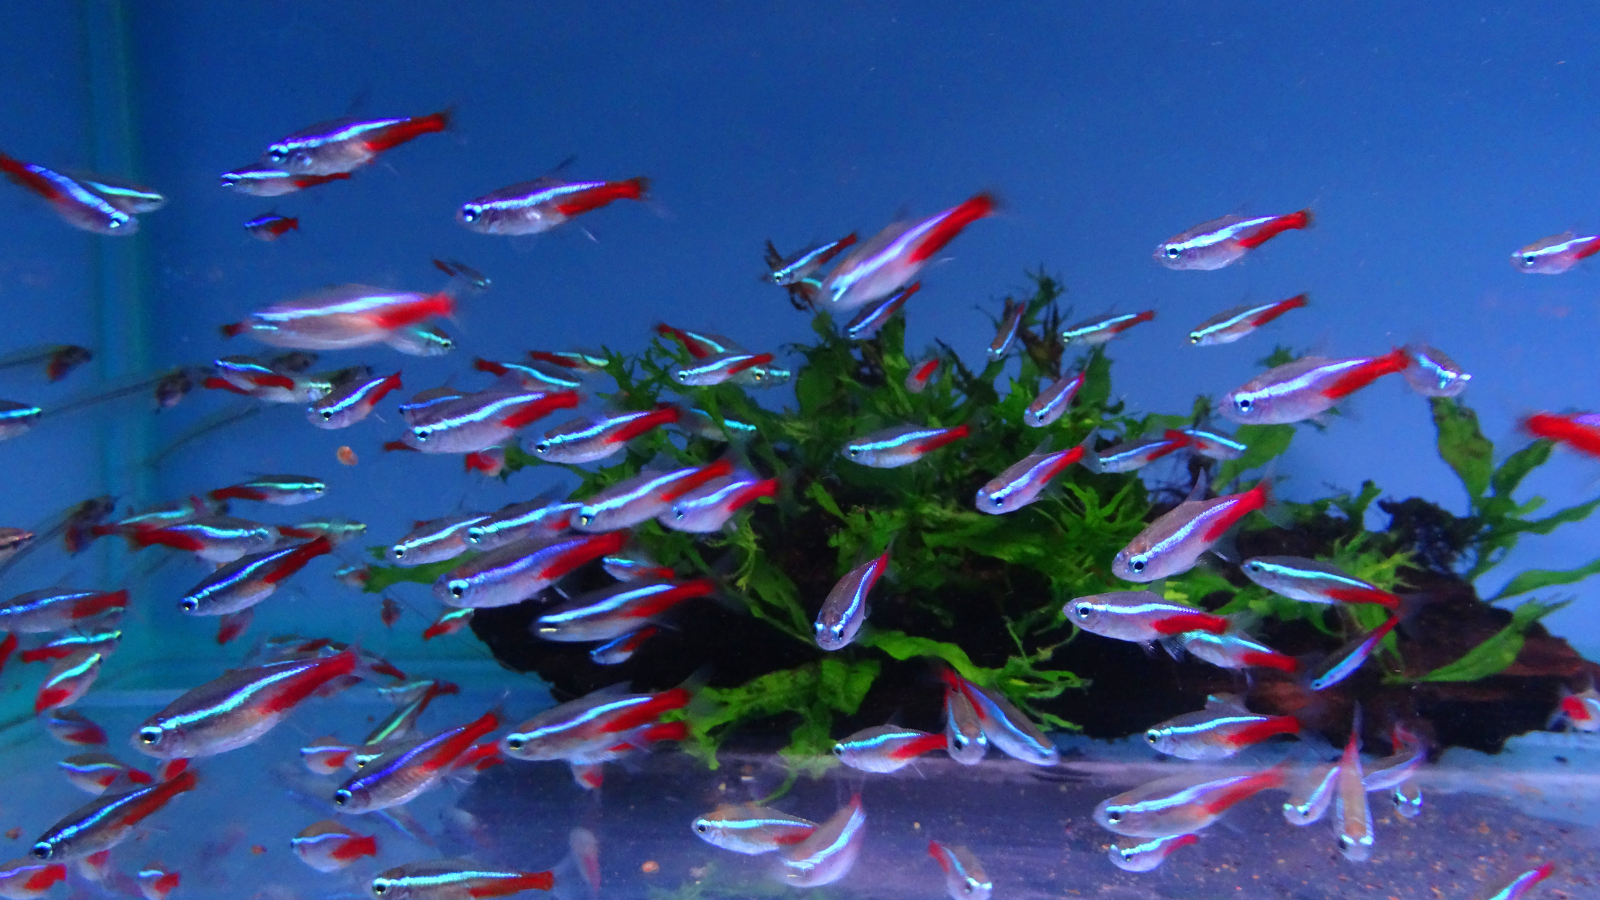 Neon tetra are one of the most commonly kept freshwater fish worldwide.